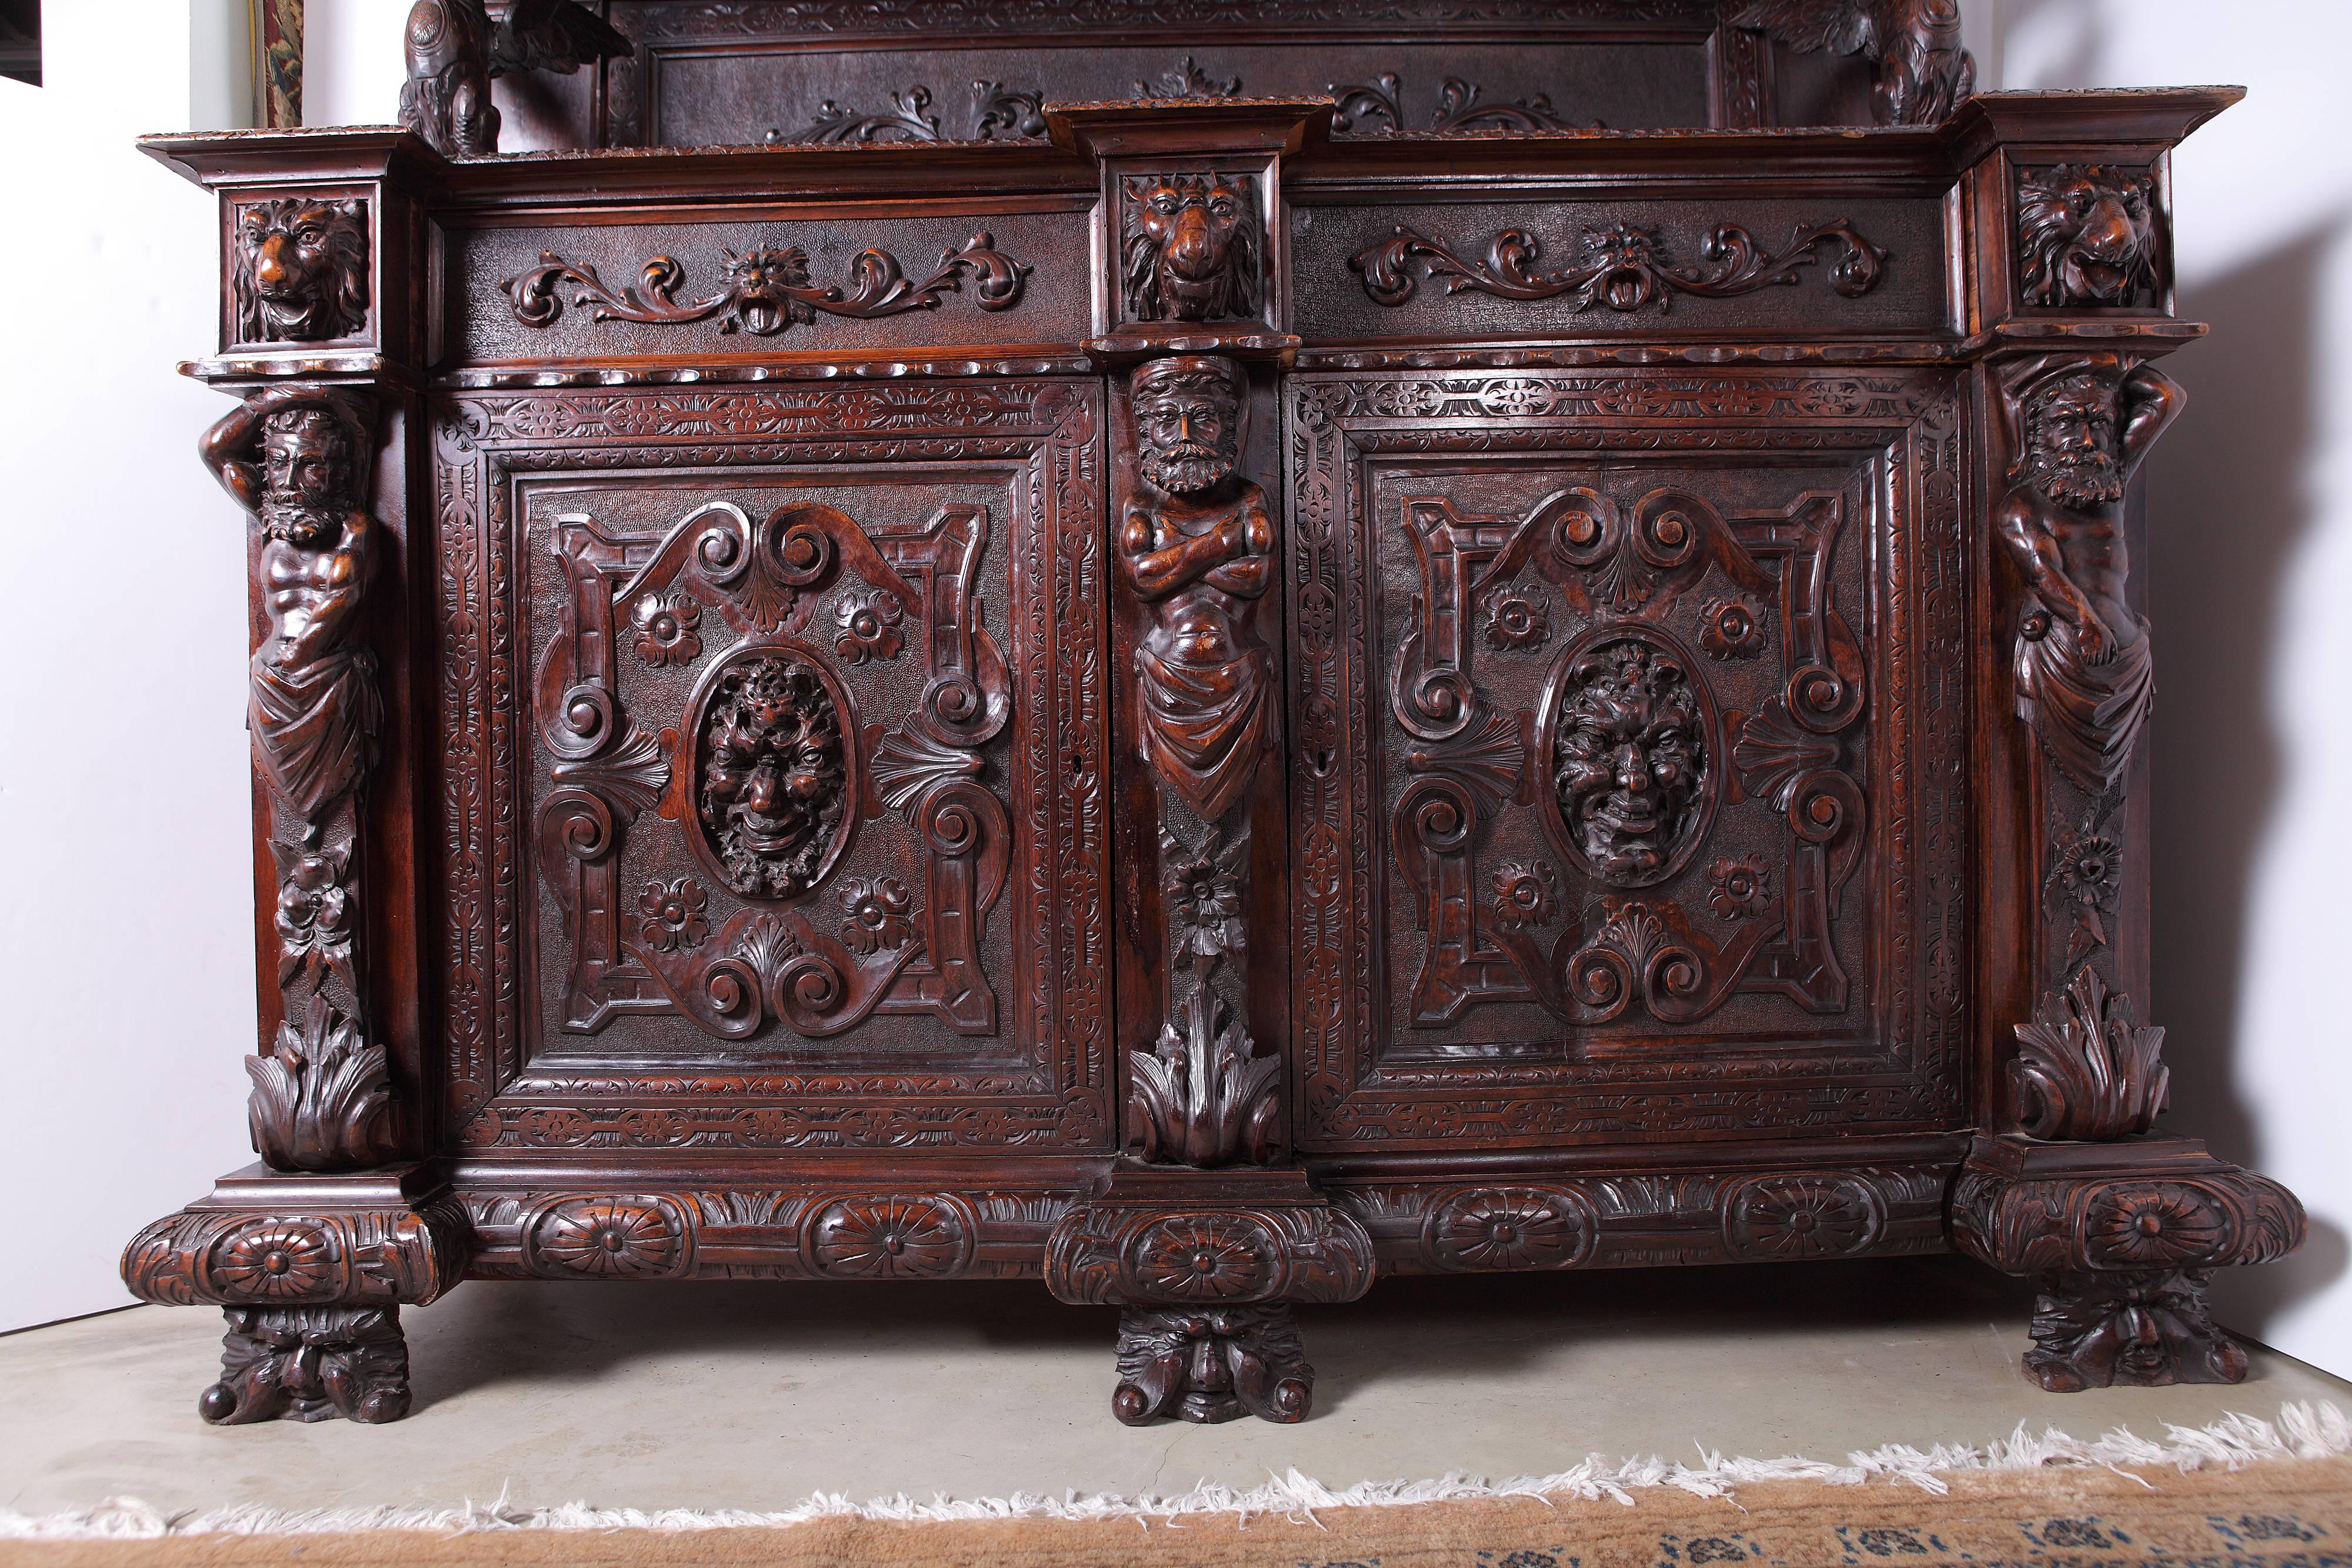 Heavily carved Italian Renaissance Revival sideboard featuring sculptural depictions of winged griffins, lions heads and figural atlas supports. In addition to the upper shelves and the lower enclosed cupboard, there are two hidden drawers. Key to